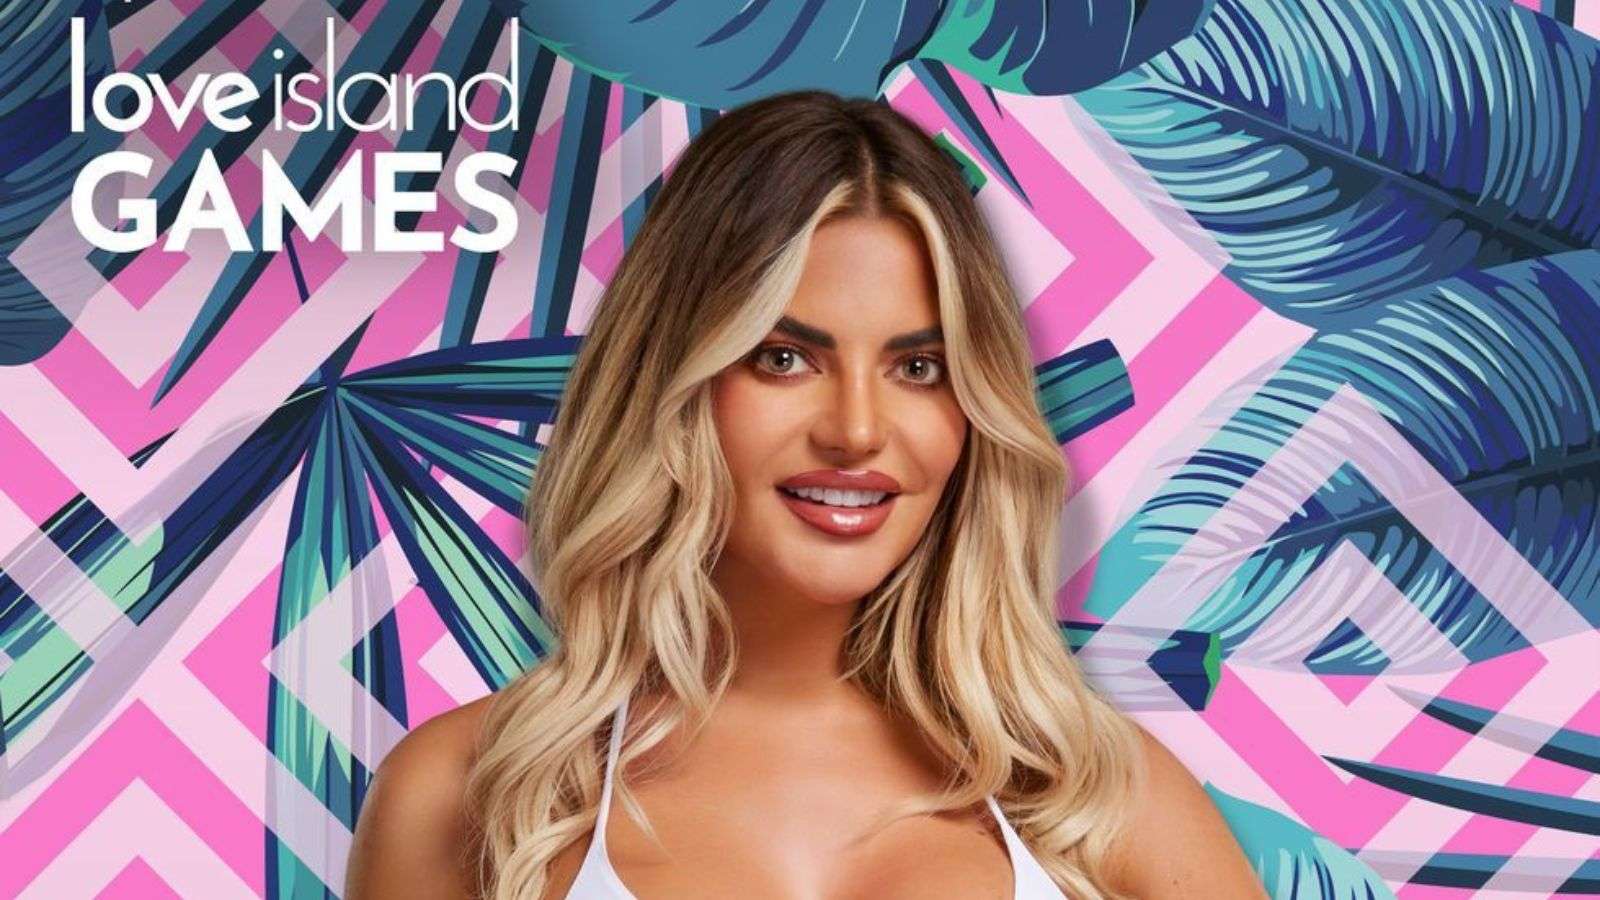 Megan from Love Island Games